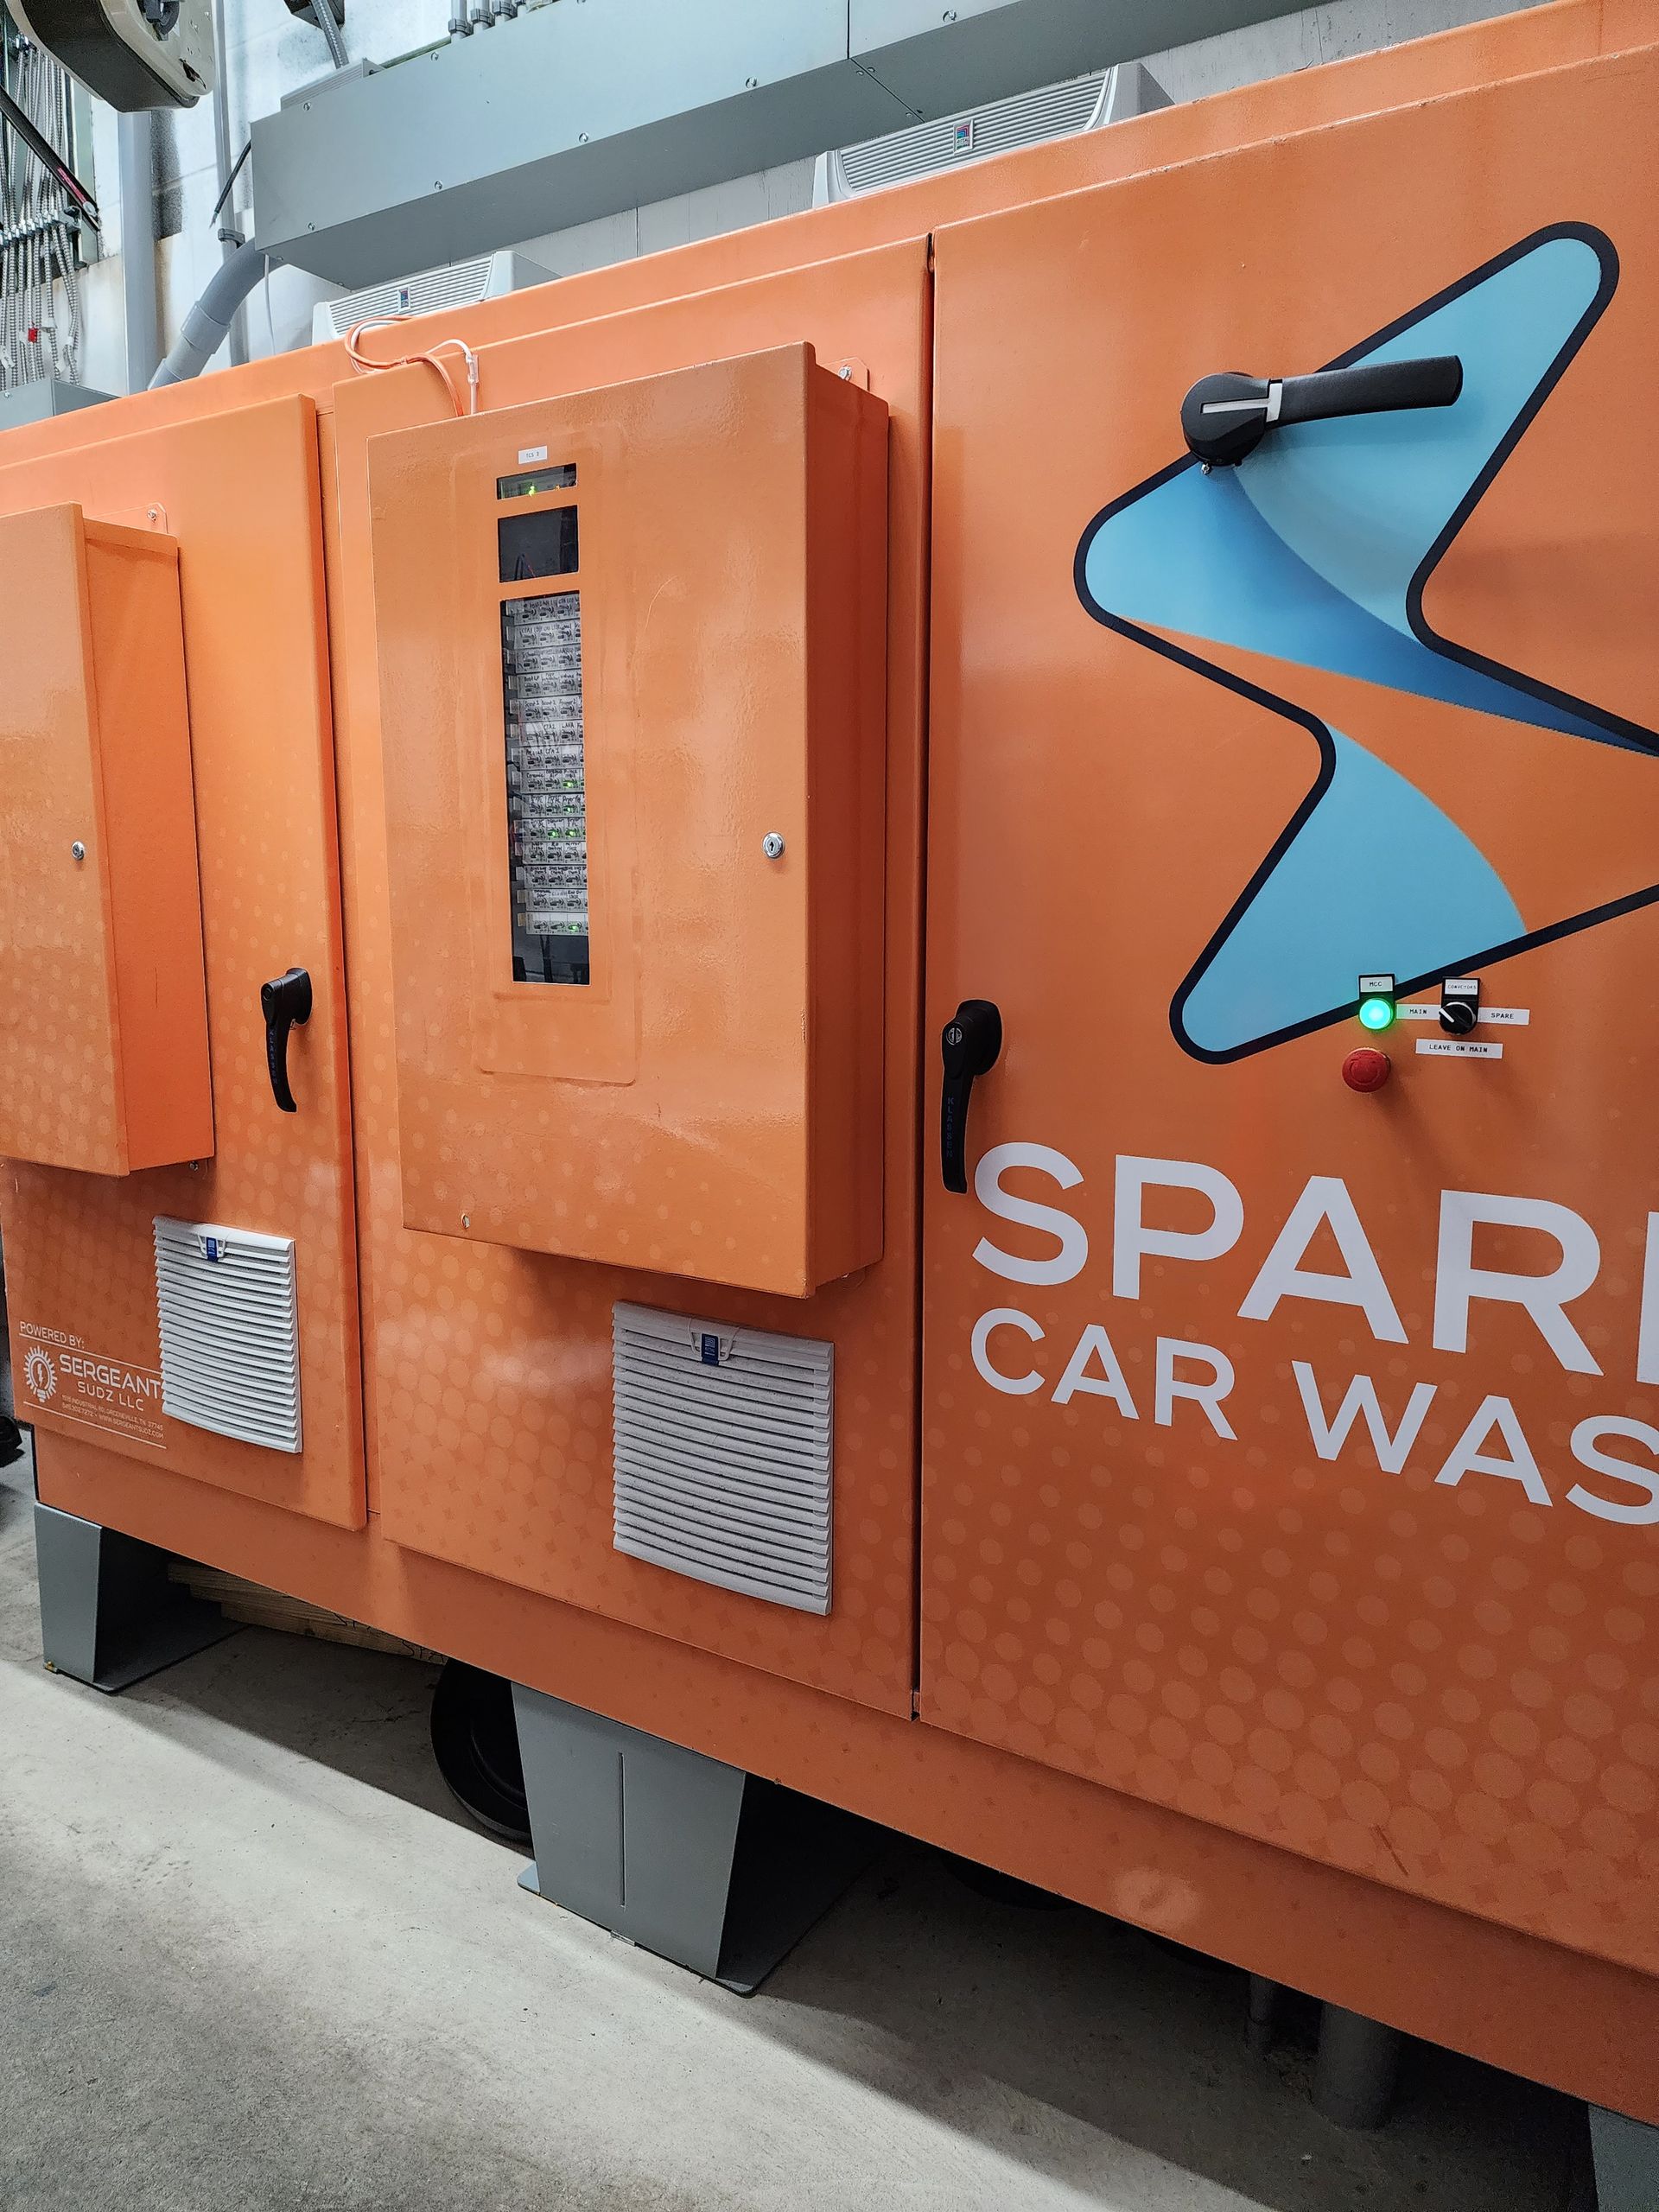 SPARK CAR WASH UPGRADES THEIR WASH EQUIPMENT WITH A SMART MCC